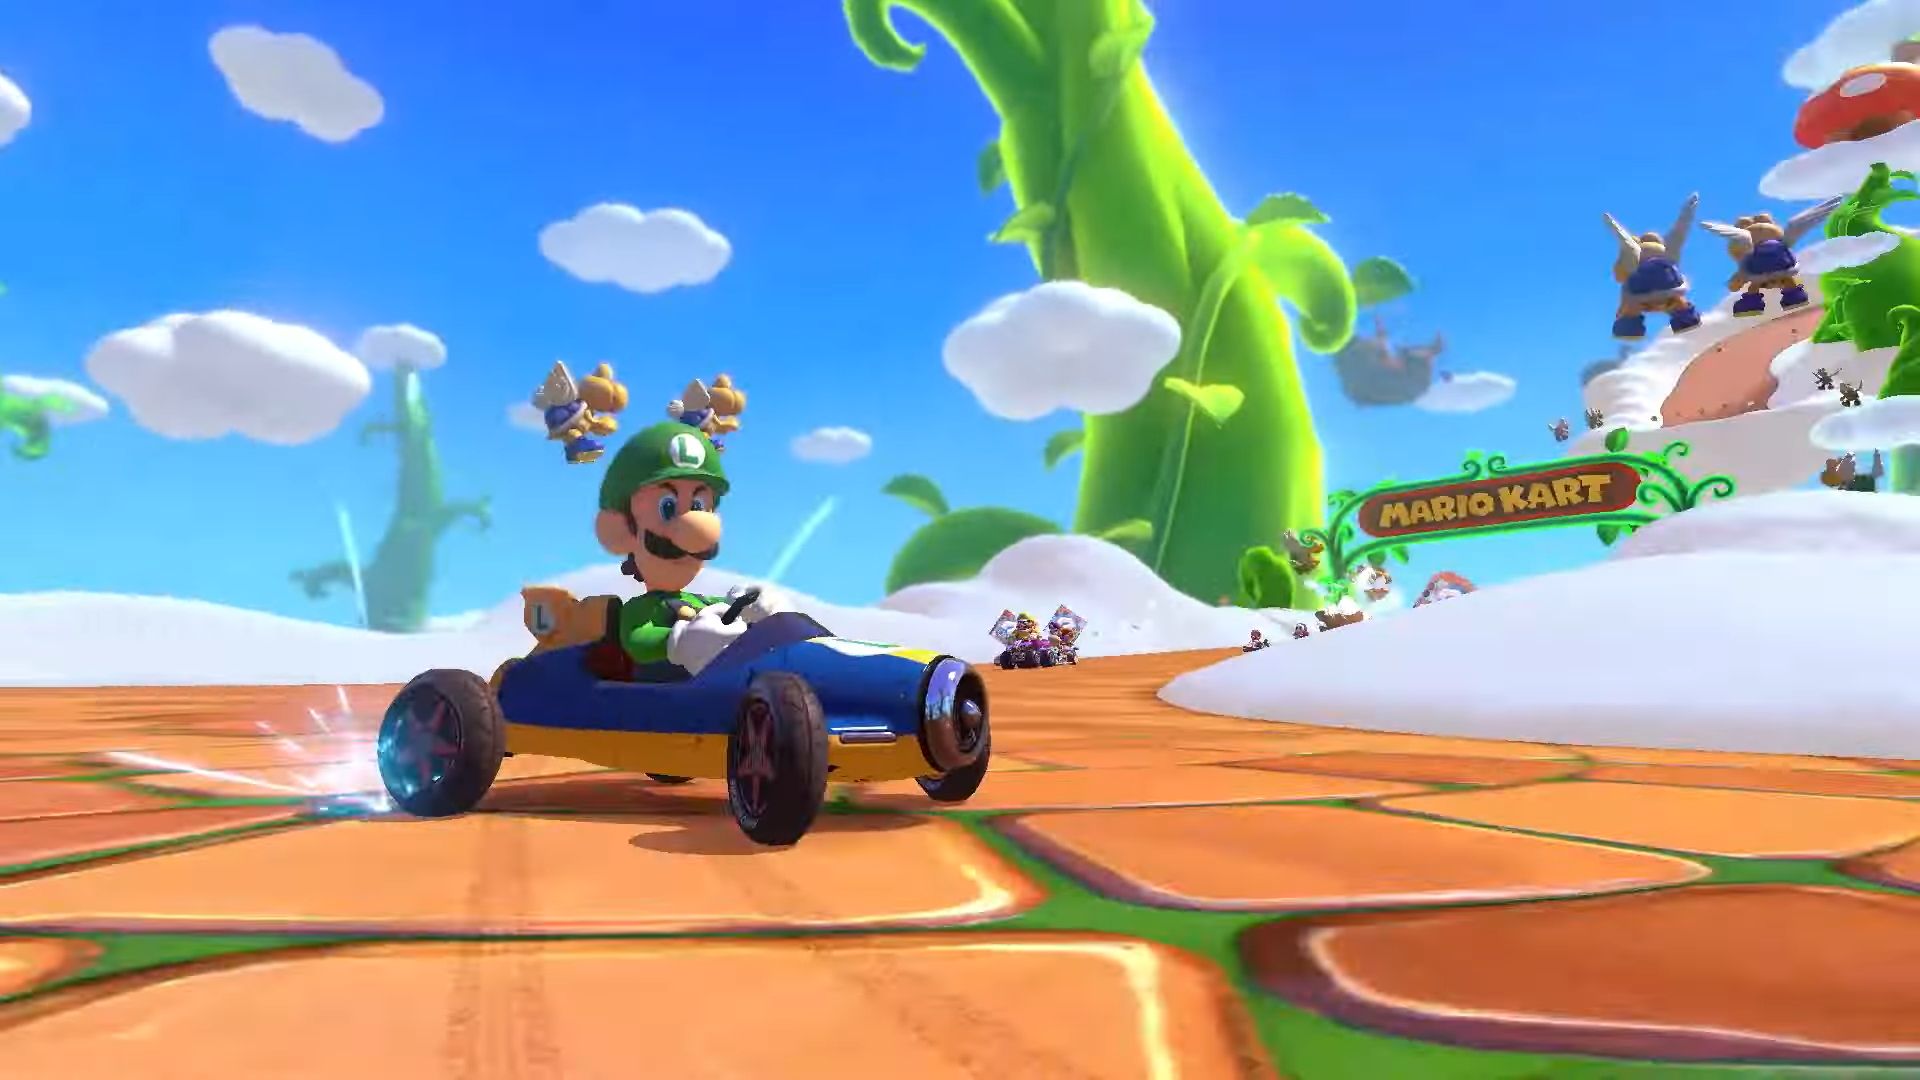 Everything You Need to Know About the Internet's Obsession With Mario Kart